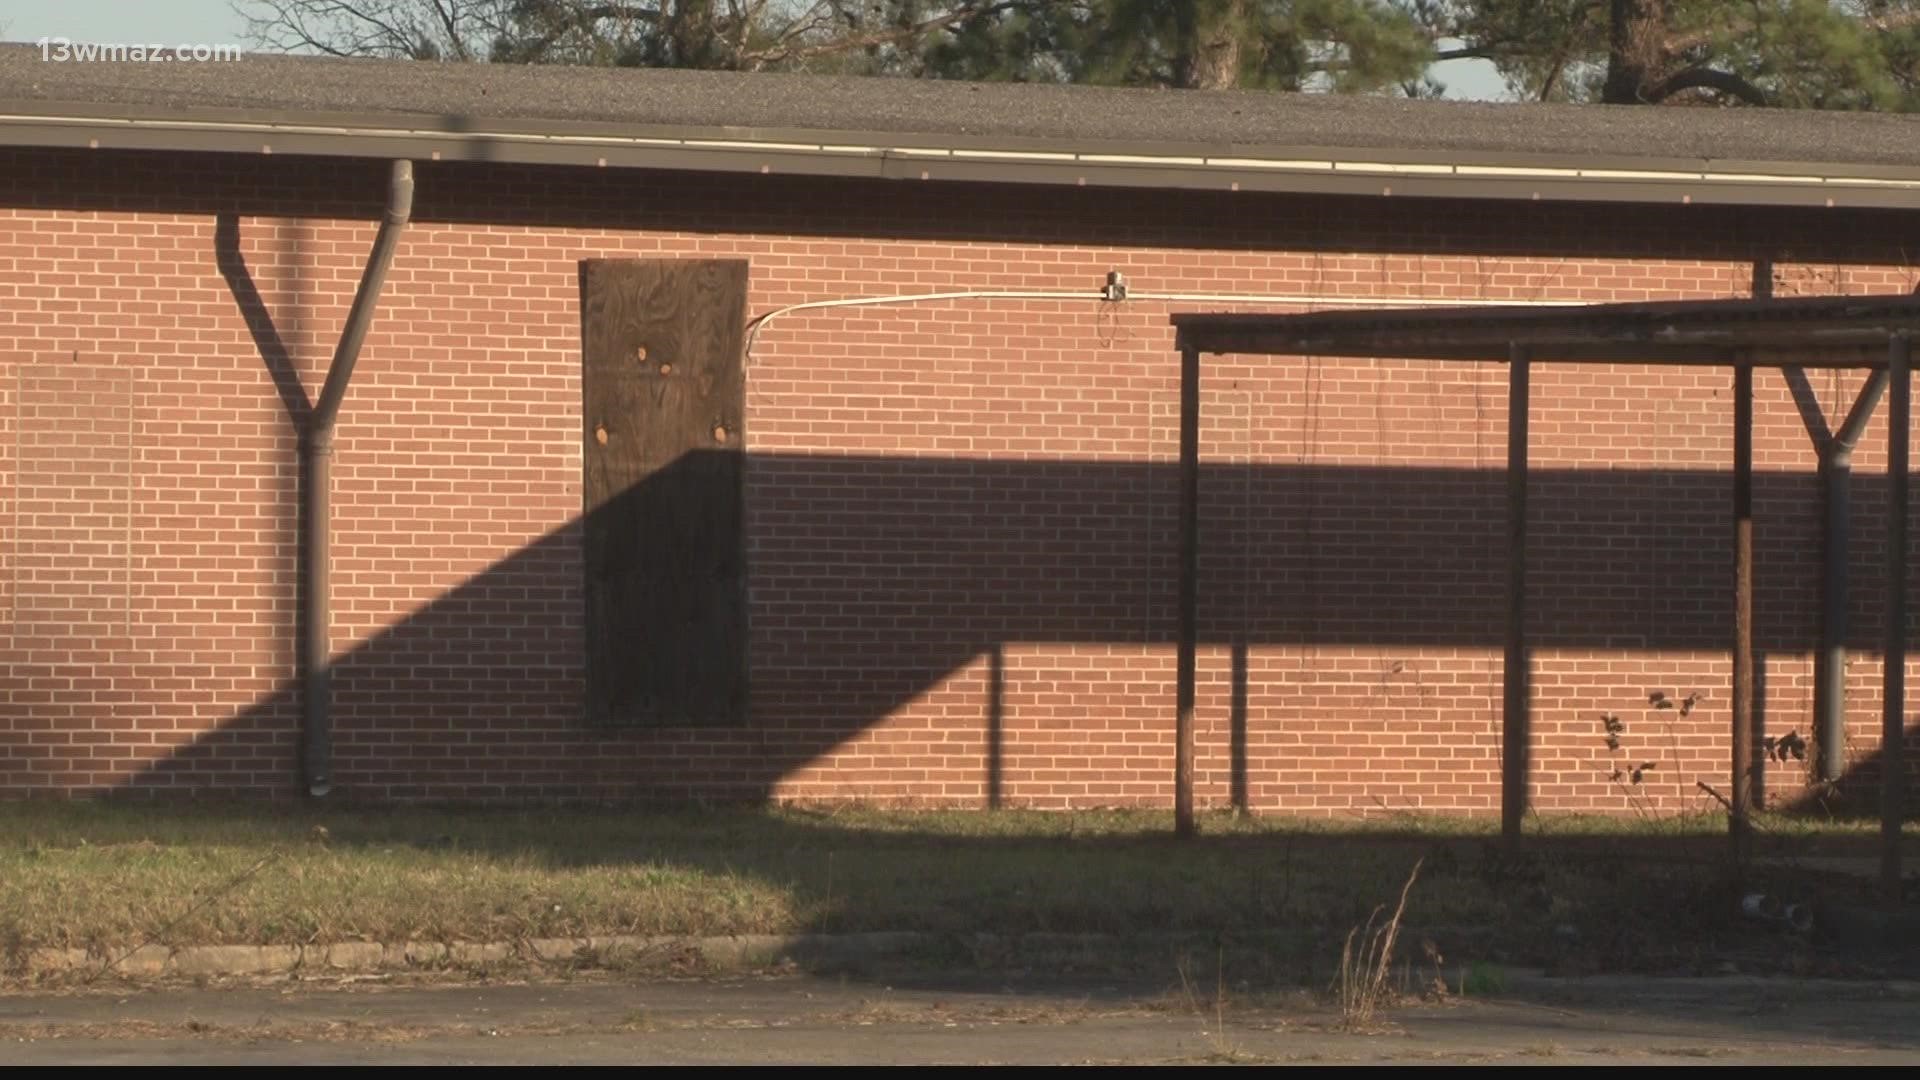 Sam Kitchens with the Bibb School District says it's a chance to get some old buildings off the rolls while helping reinvest in the community.